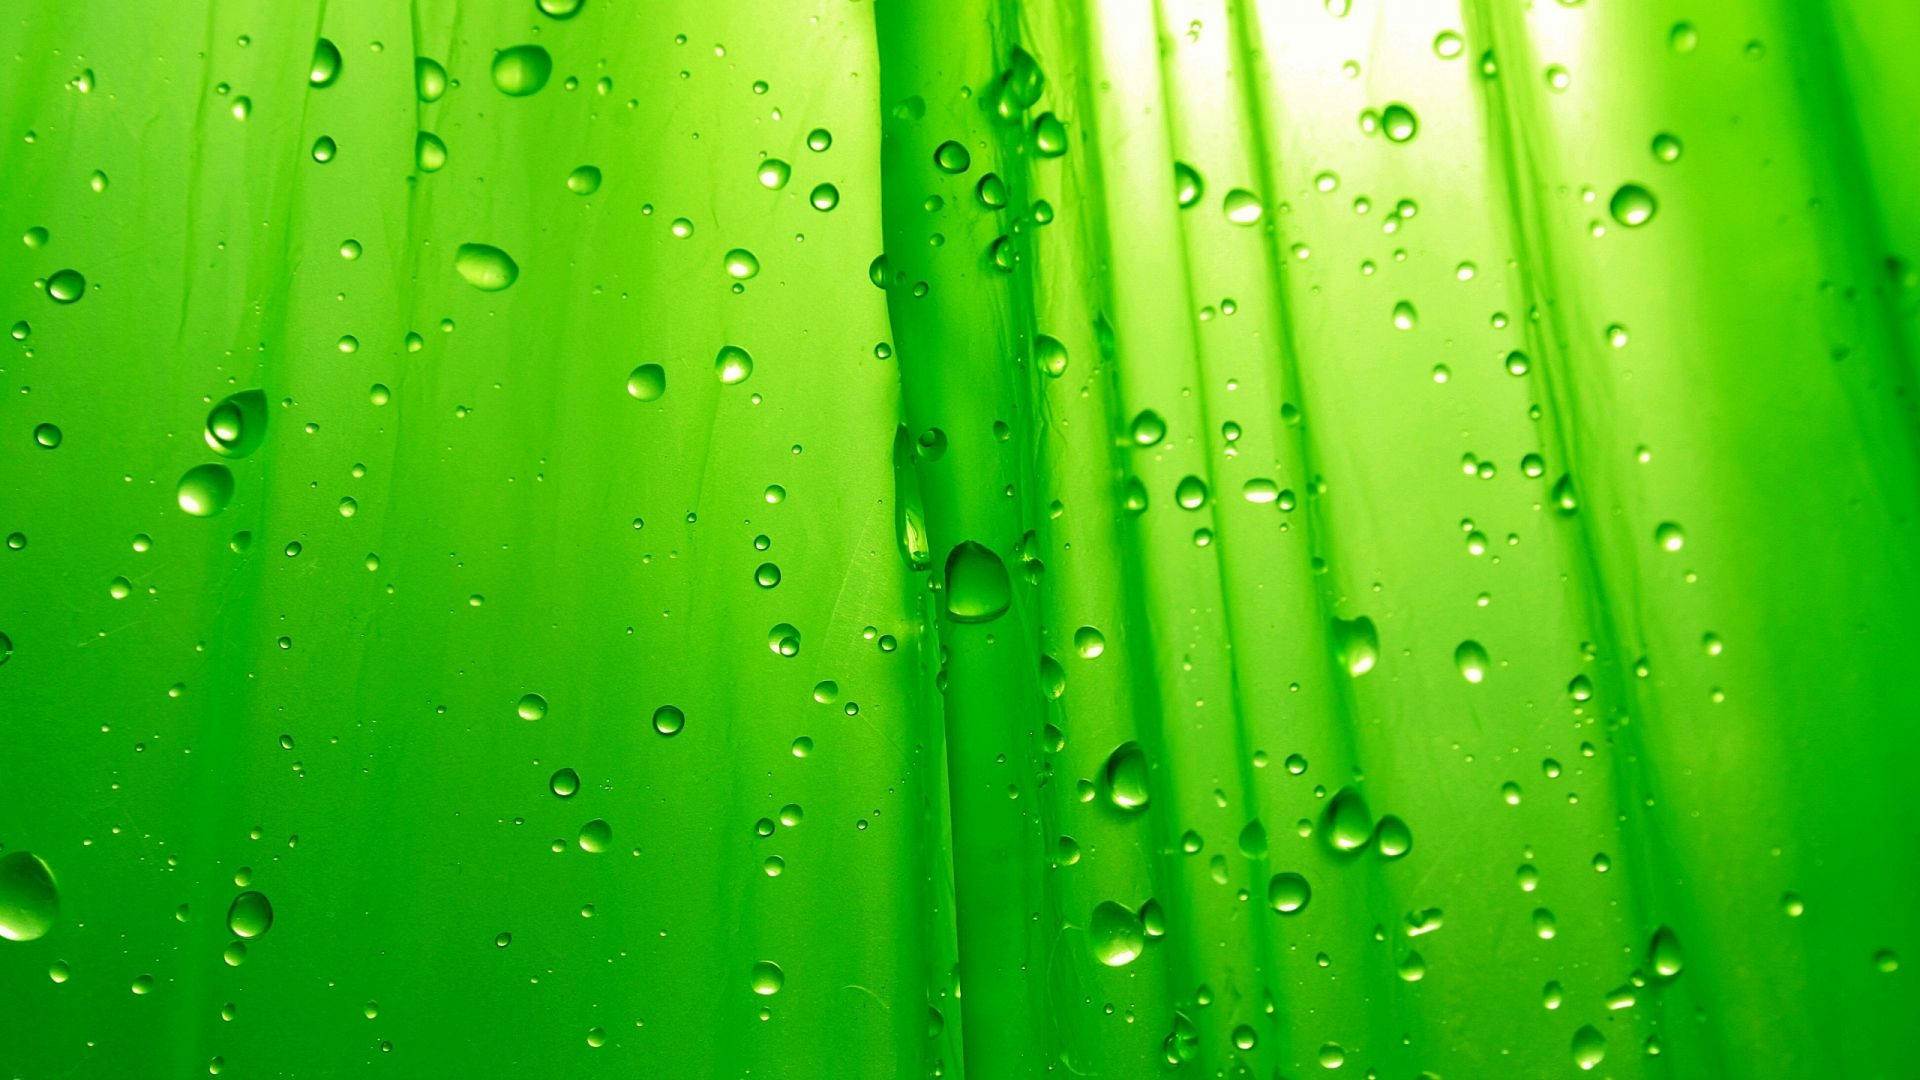 HD Green Backgrounds Wallpapers High Quality Wallpapers